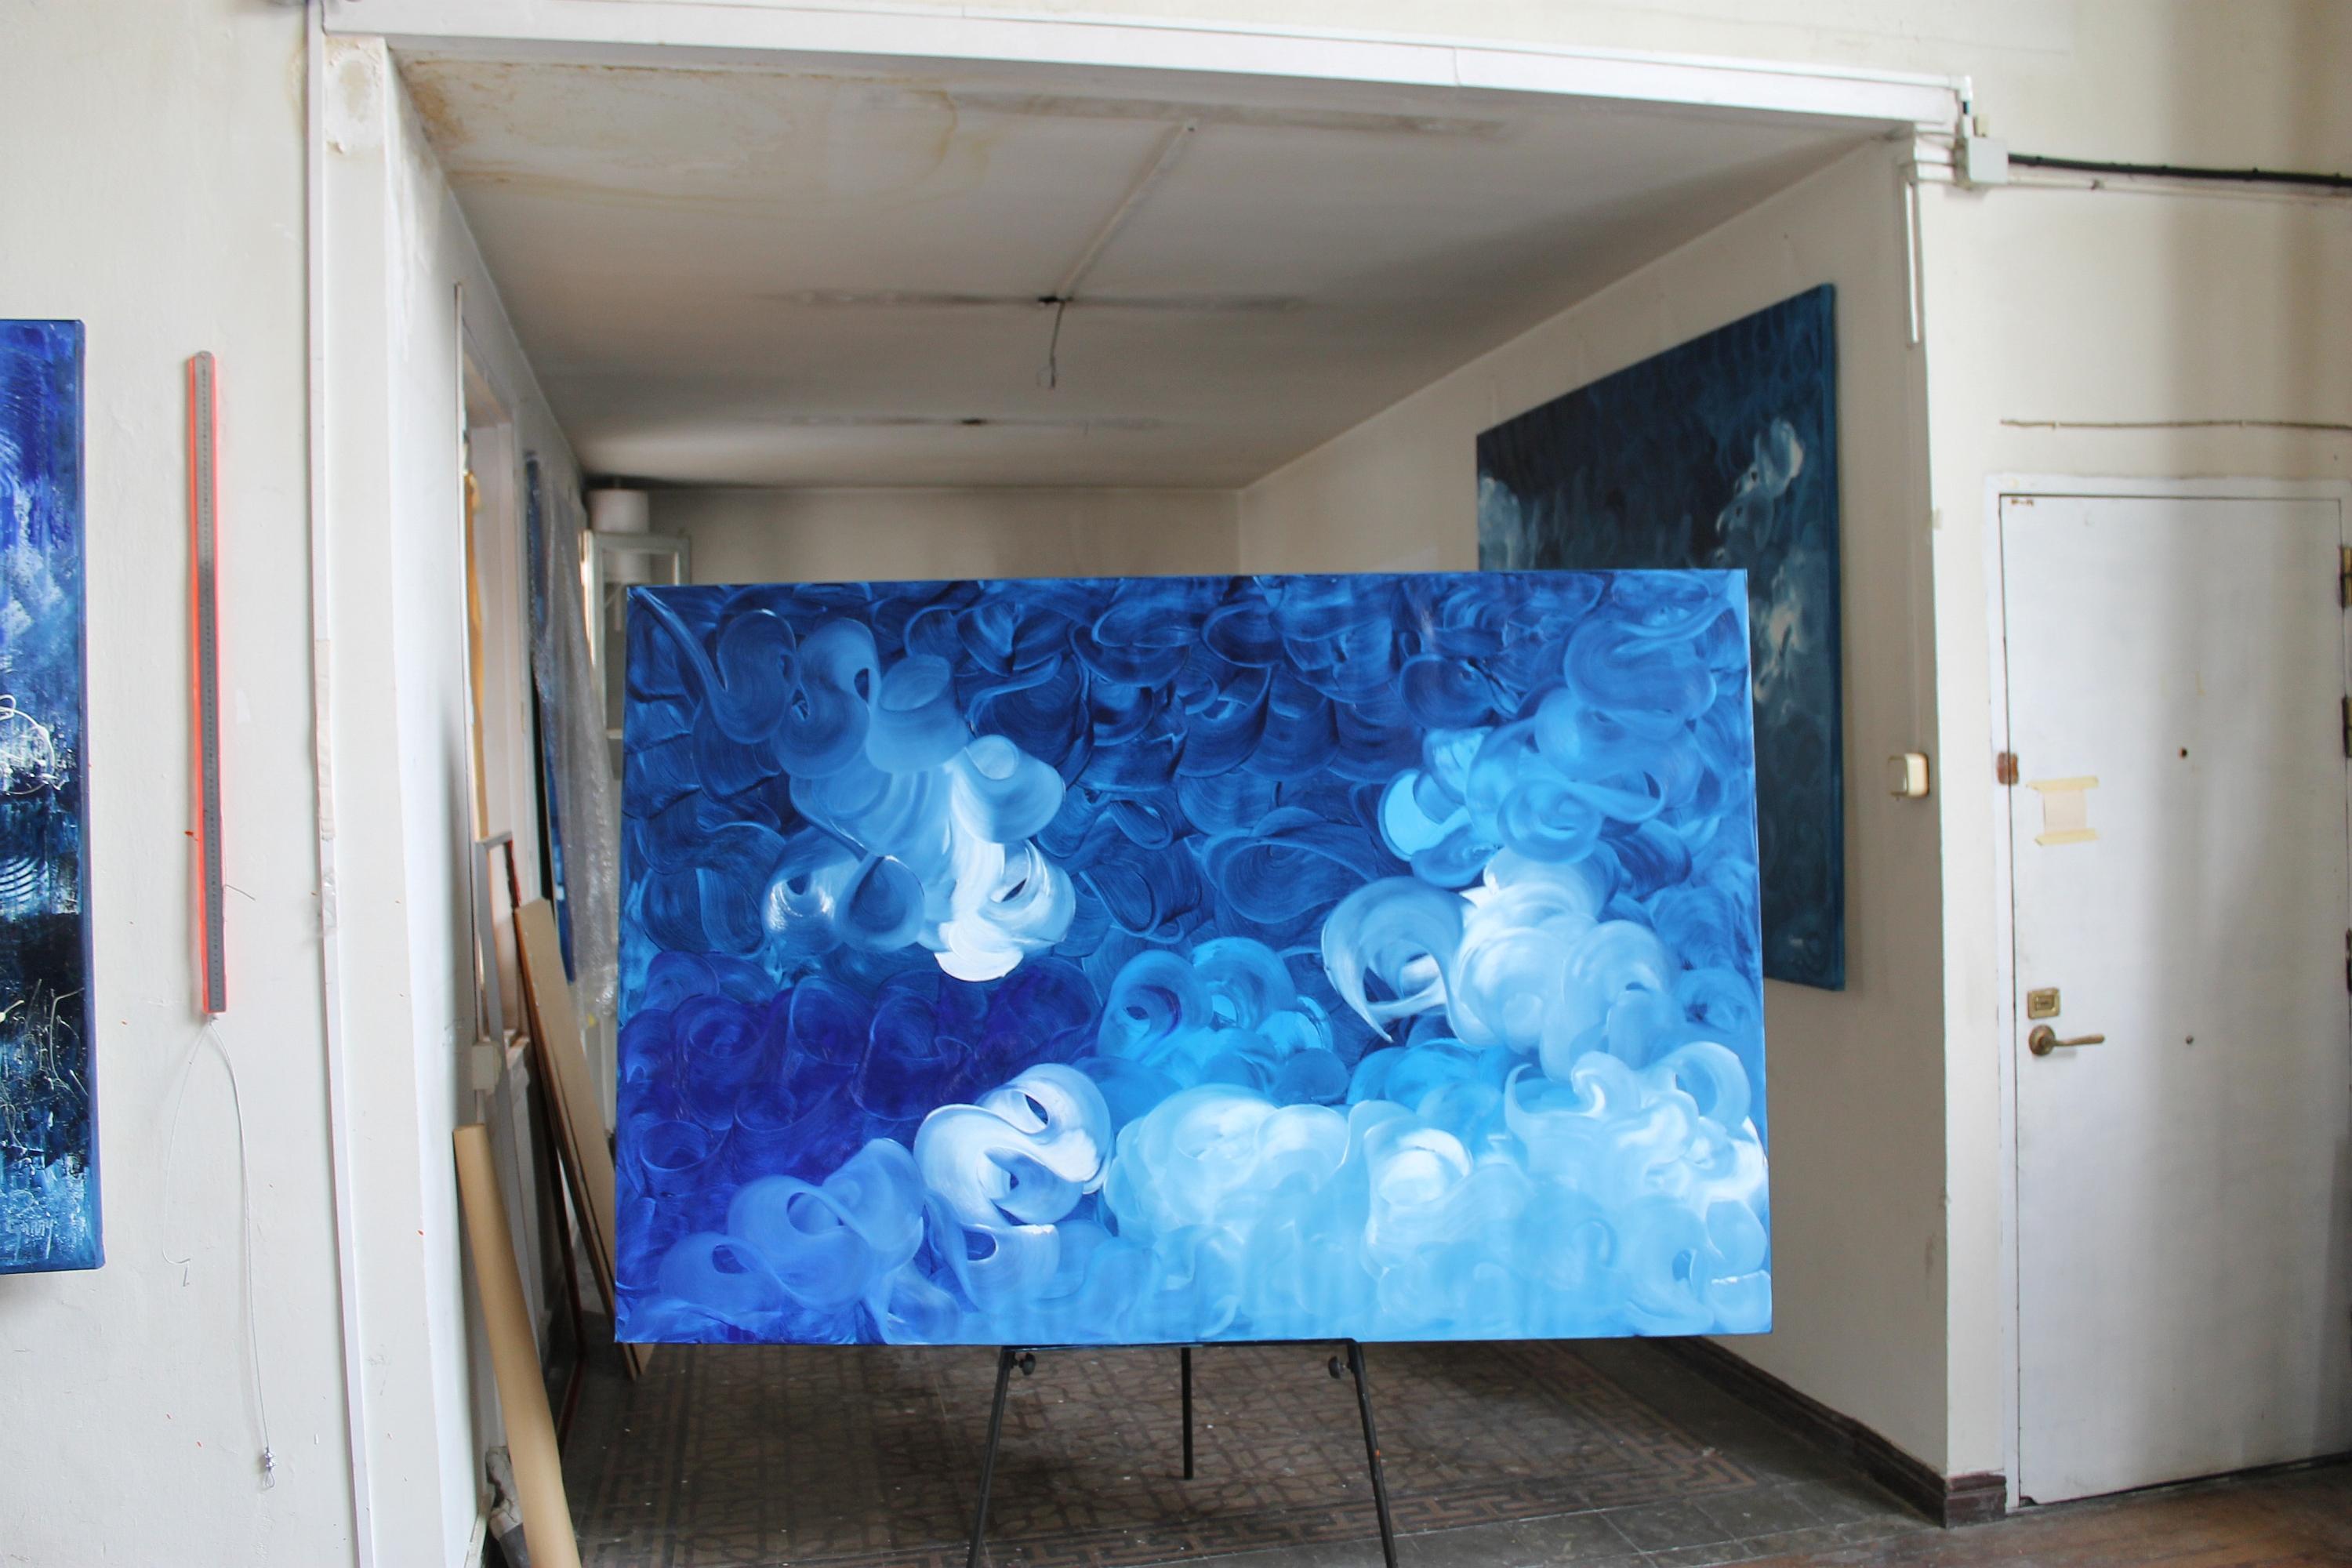 Due to the size of the work, it was Shipped rolled in a tube without a frame

Painting: Oil on Canvas. Oversize XXL Abstract Painting.

This large painting is a majestic work of art that exudes a sense of peace and serenity. The background of the